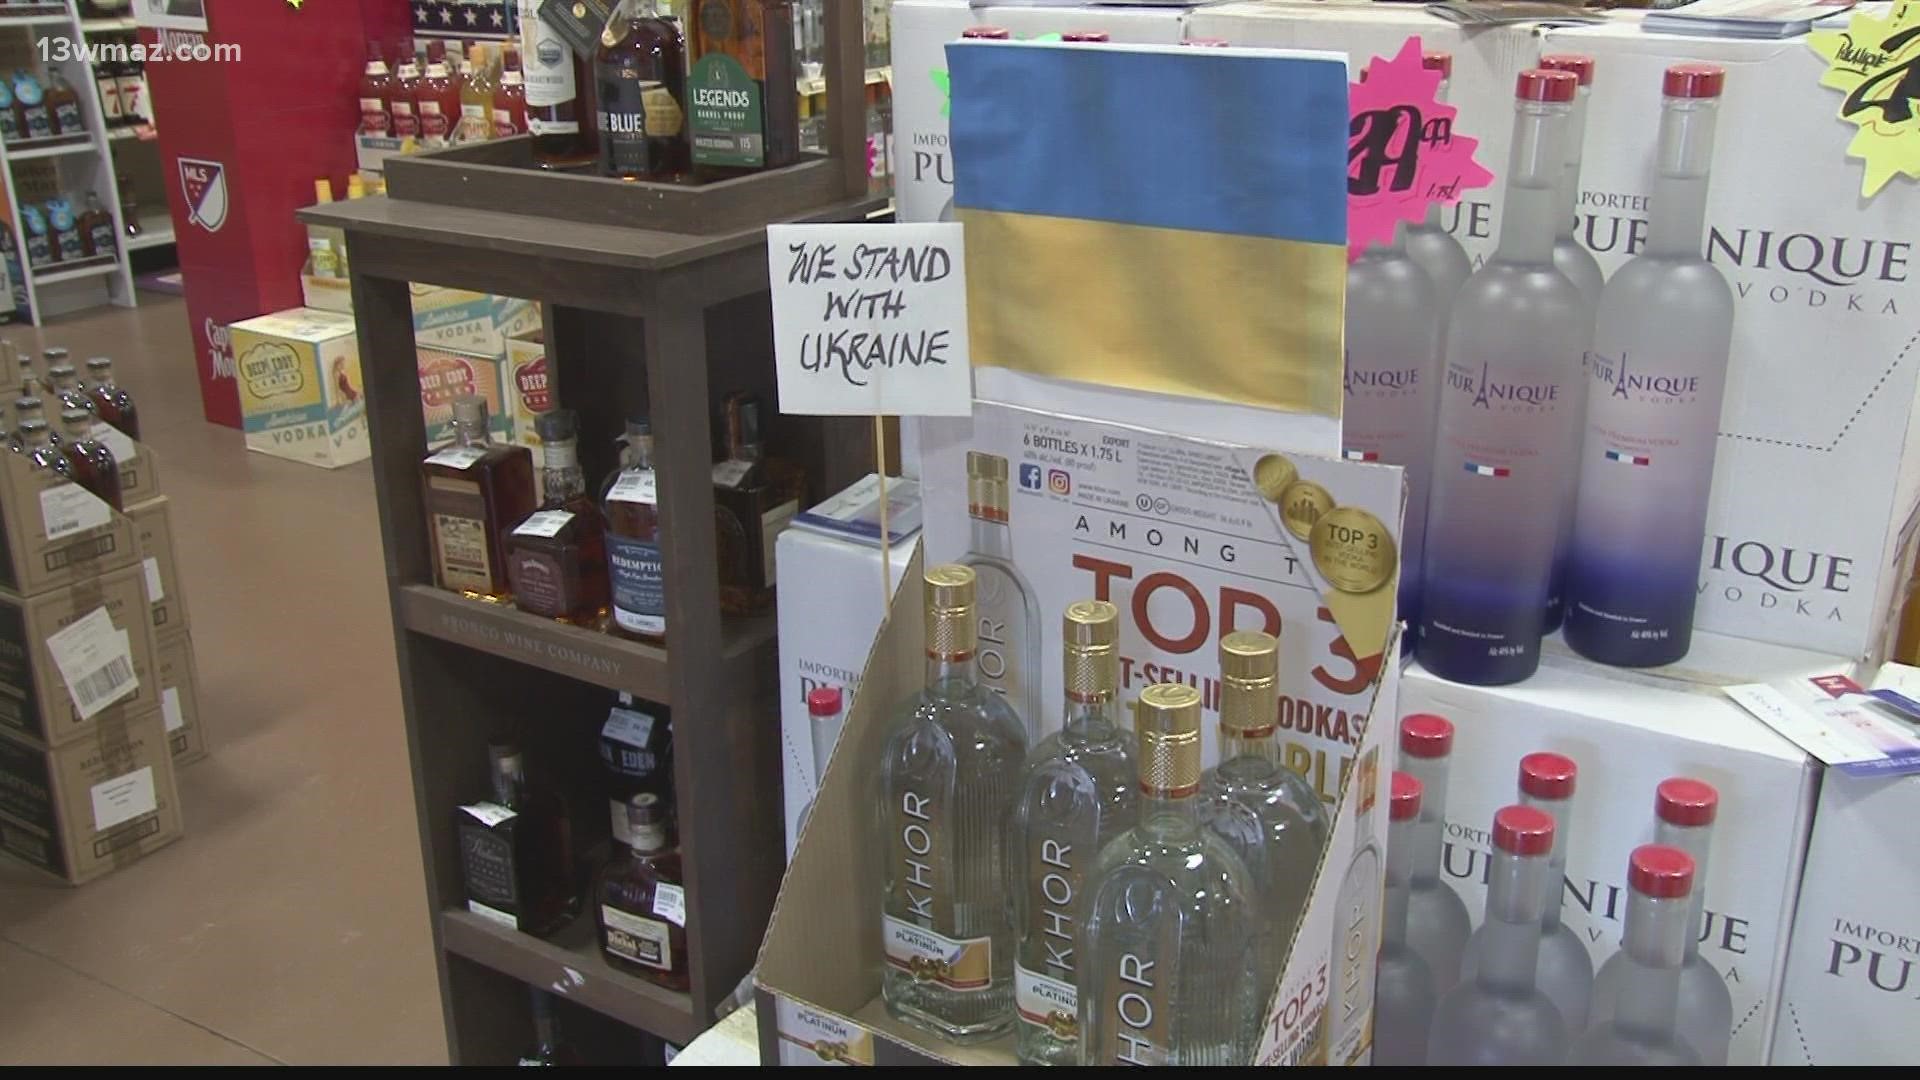 Liquor store's and bars are showing solidarity through discontinued use of Russian products